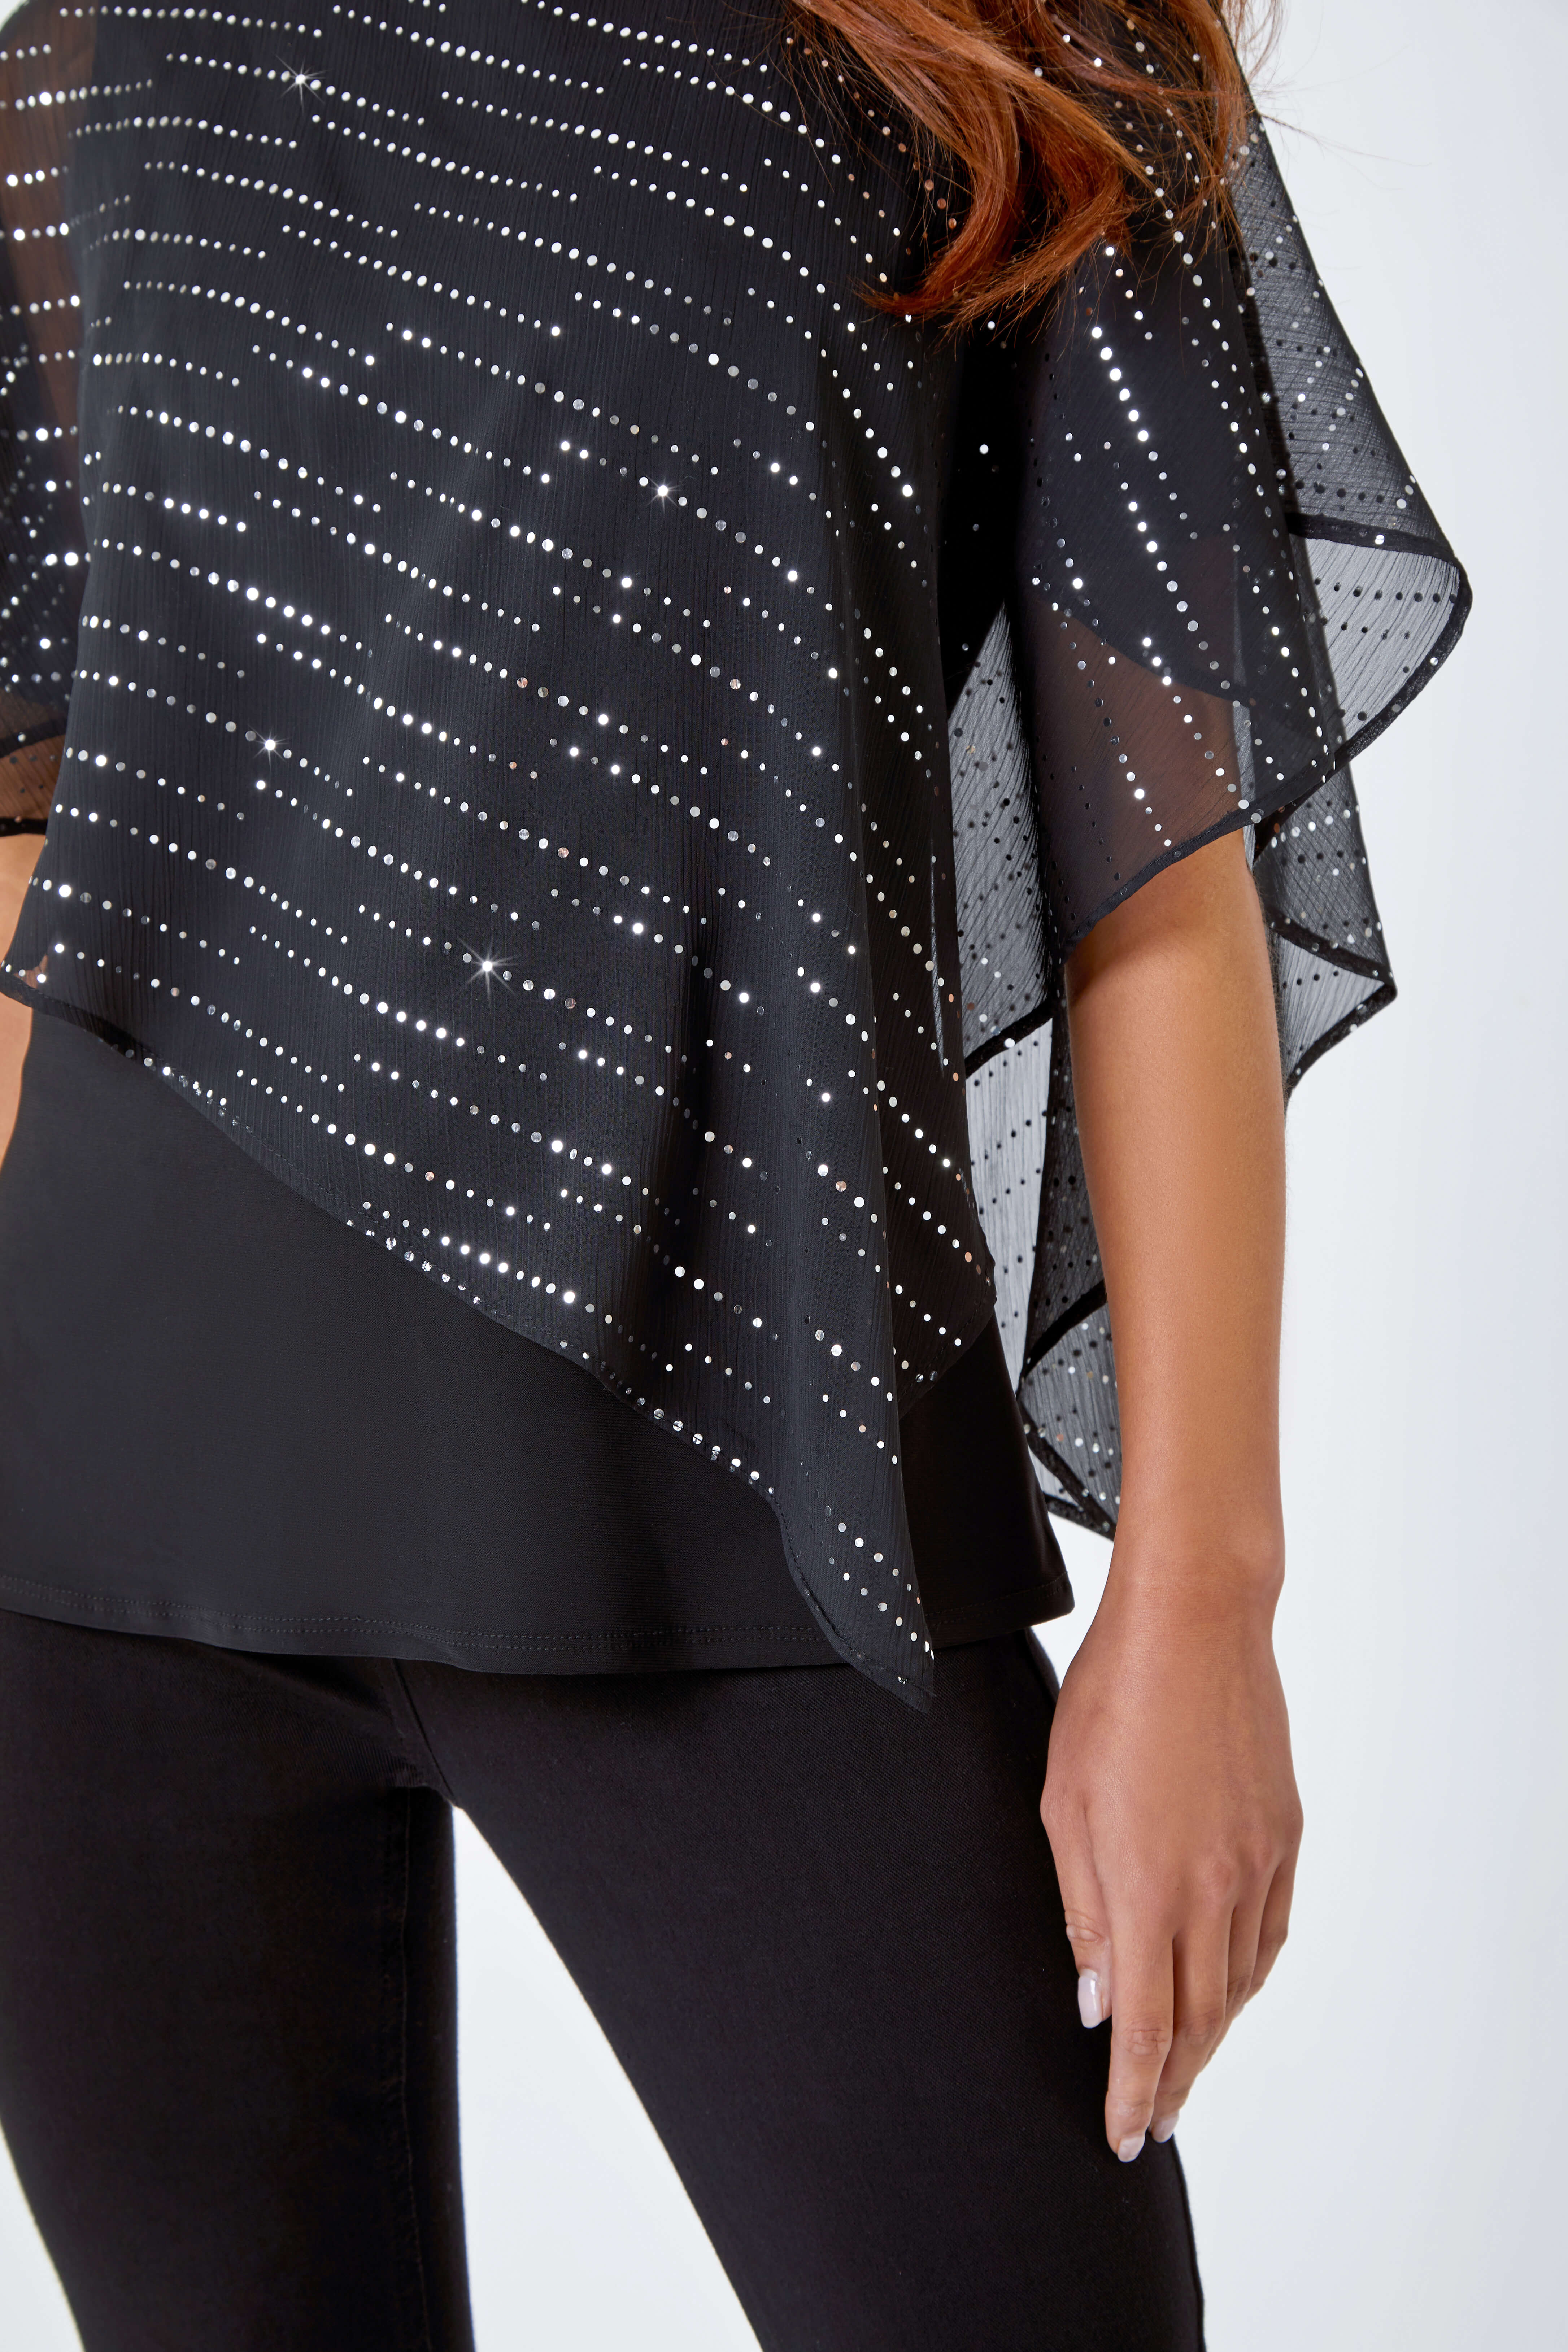 Multi  Petite Shimmer Chiffon Overlay Stretch Top, Image 5 of 5